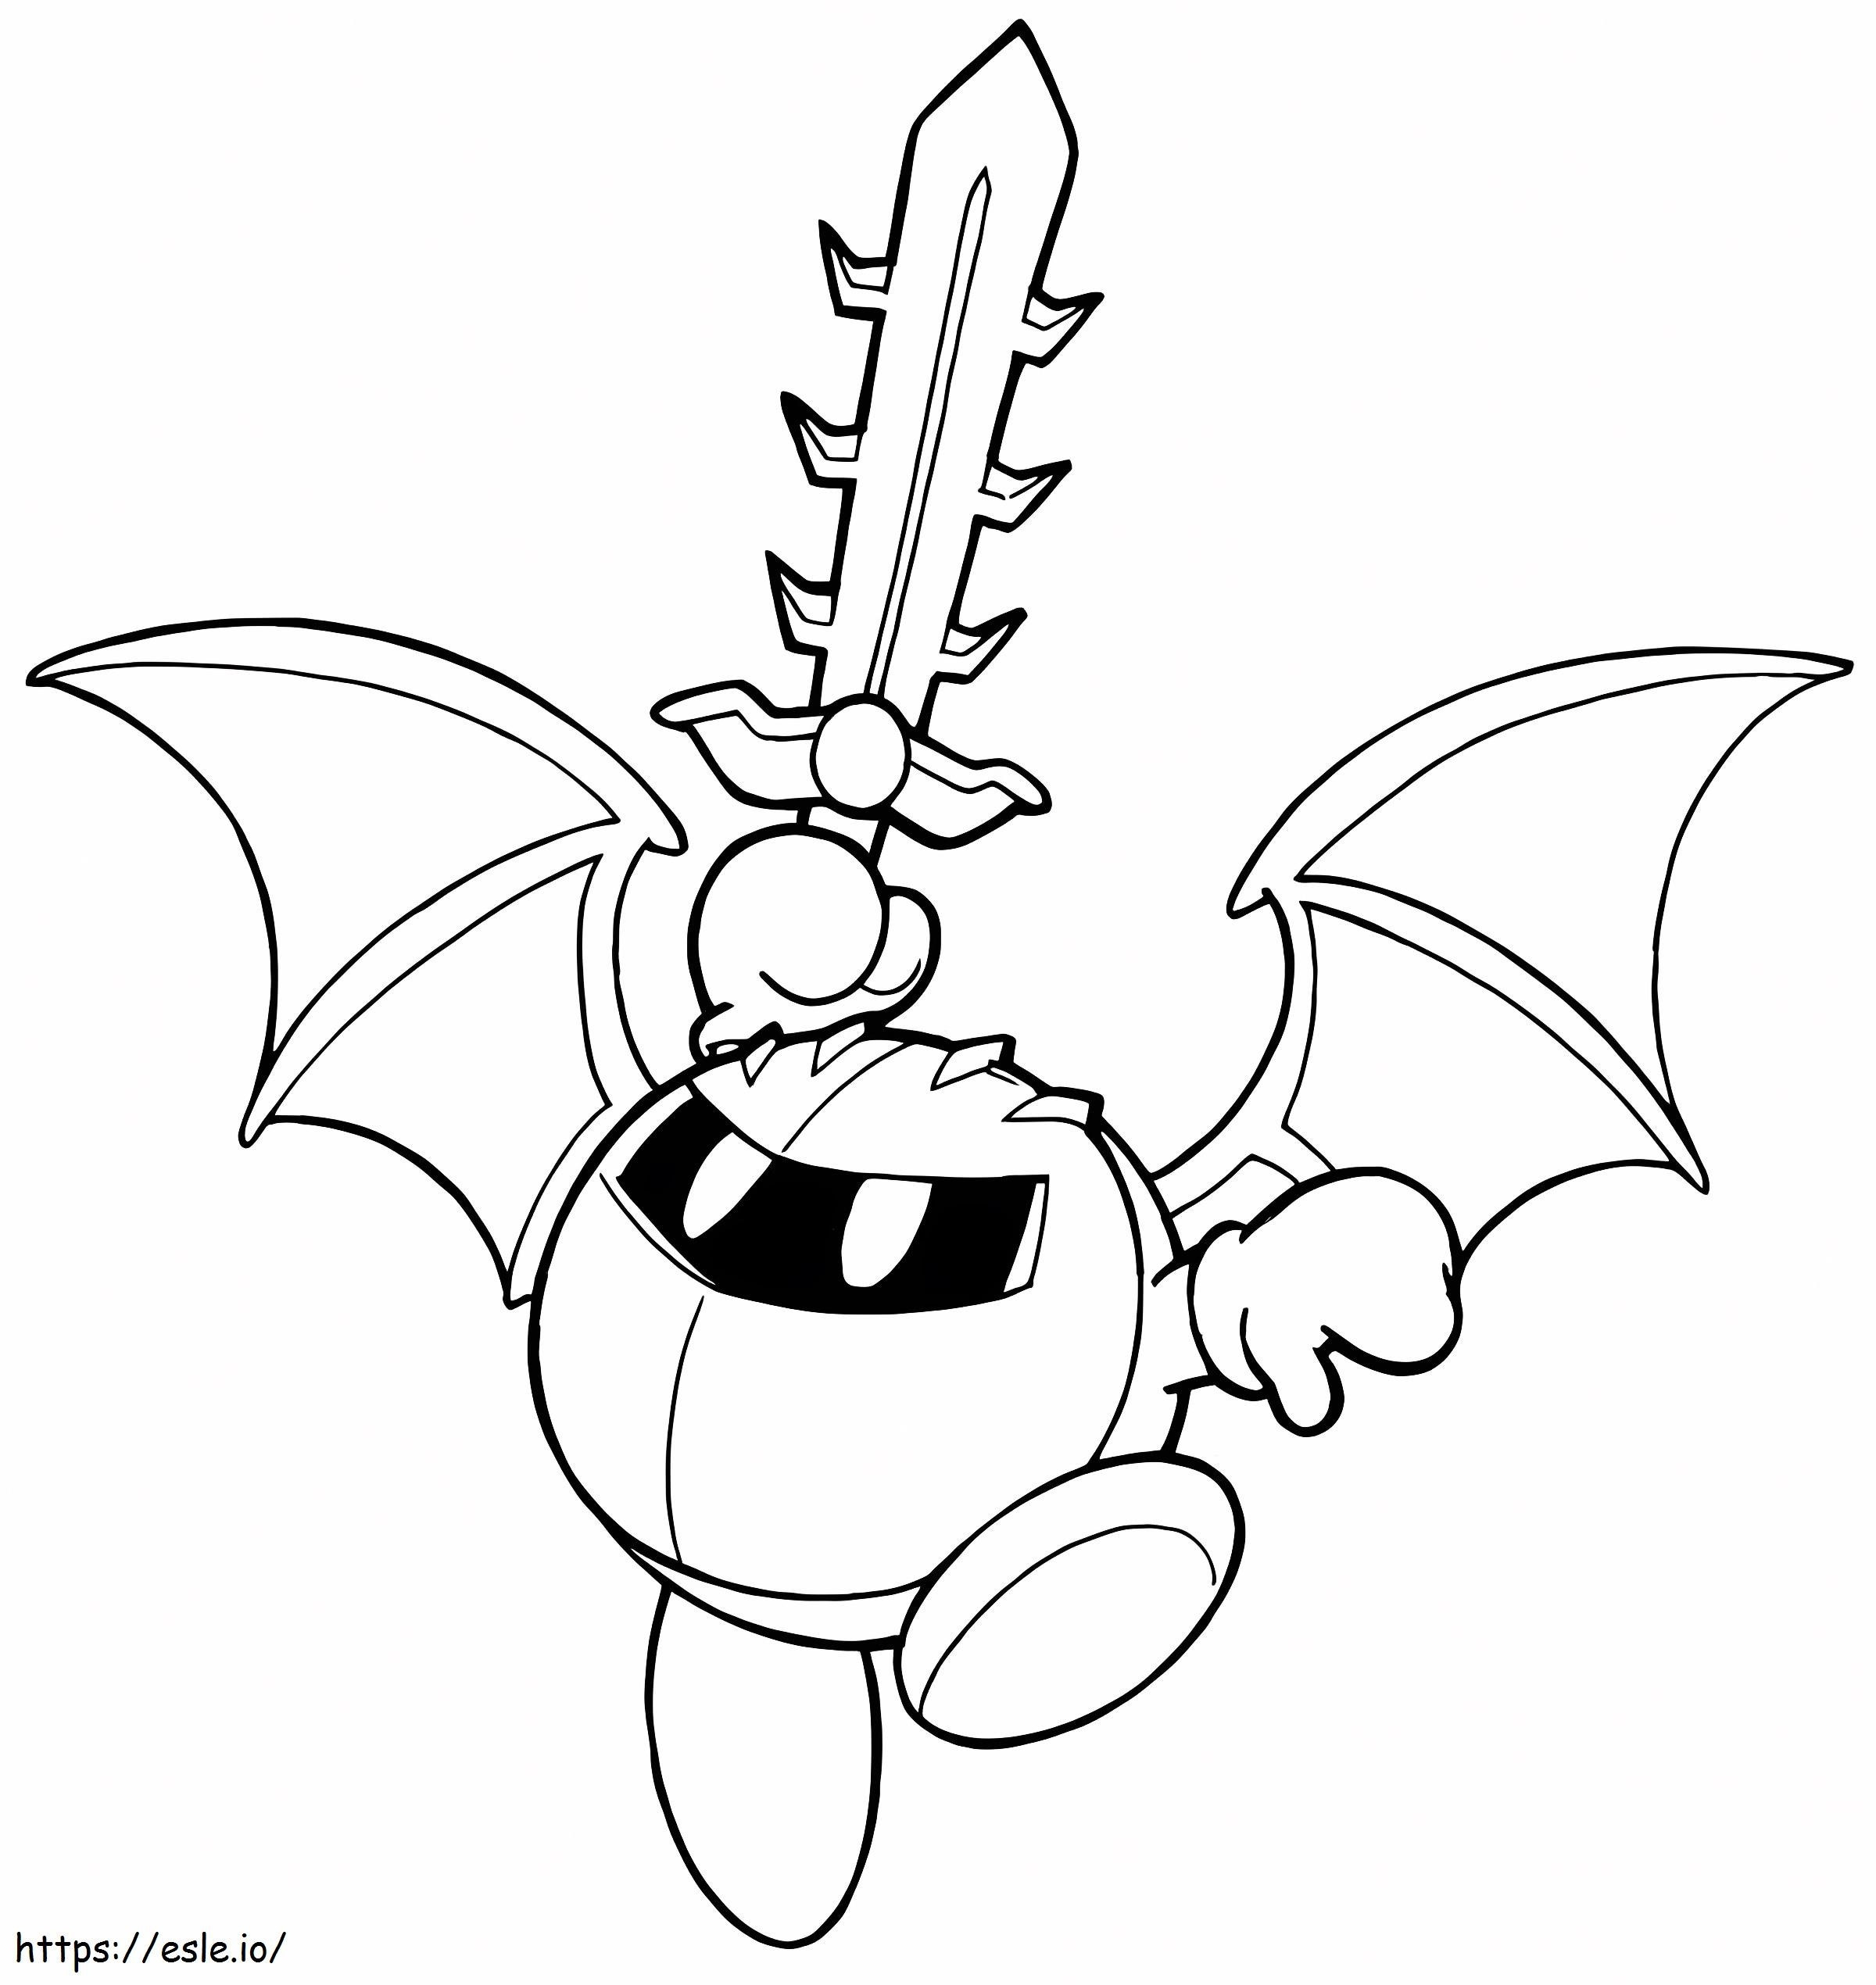 Warrior Kirby coloring page